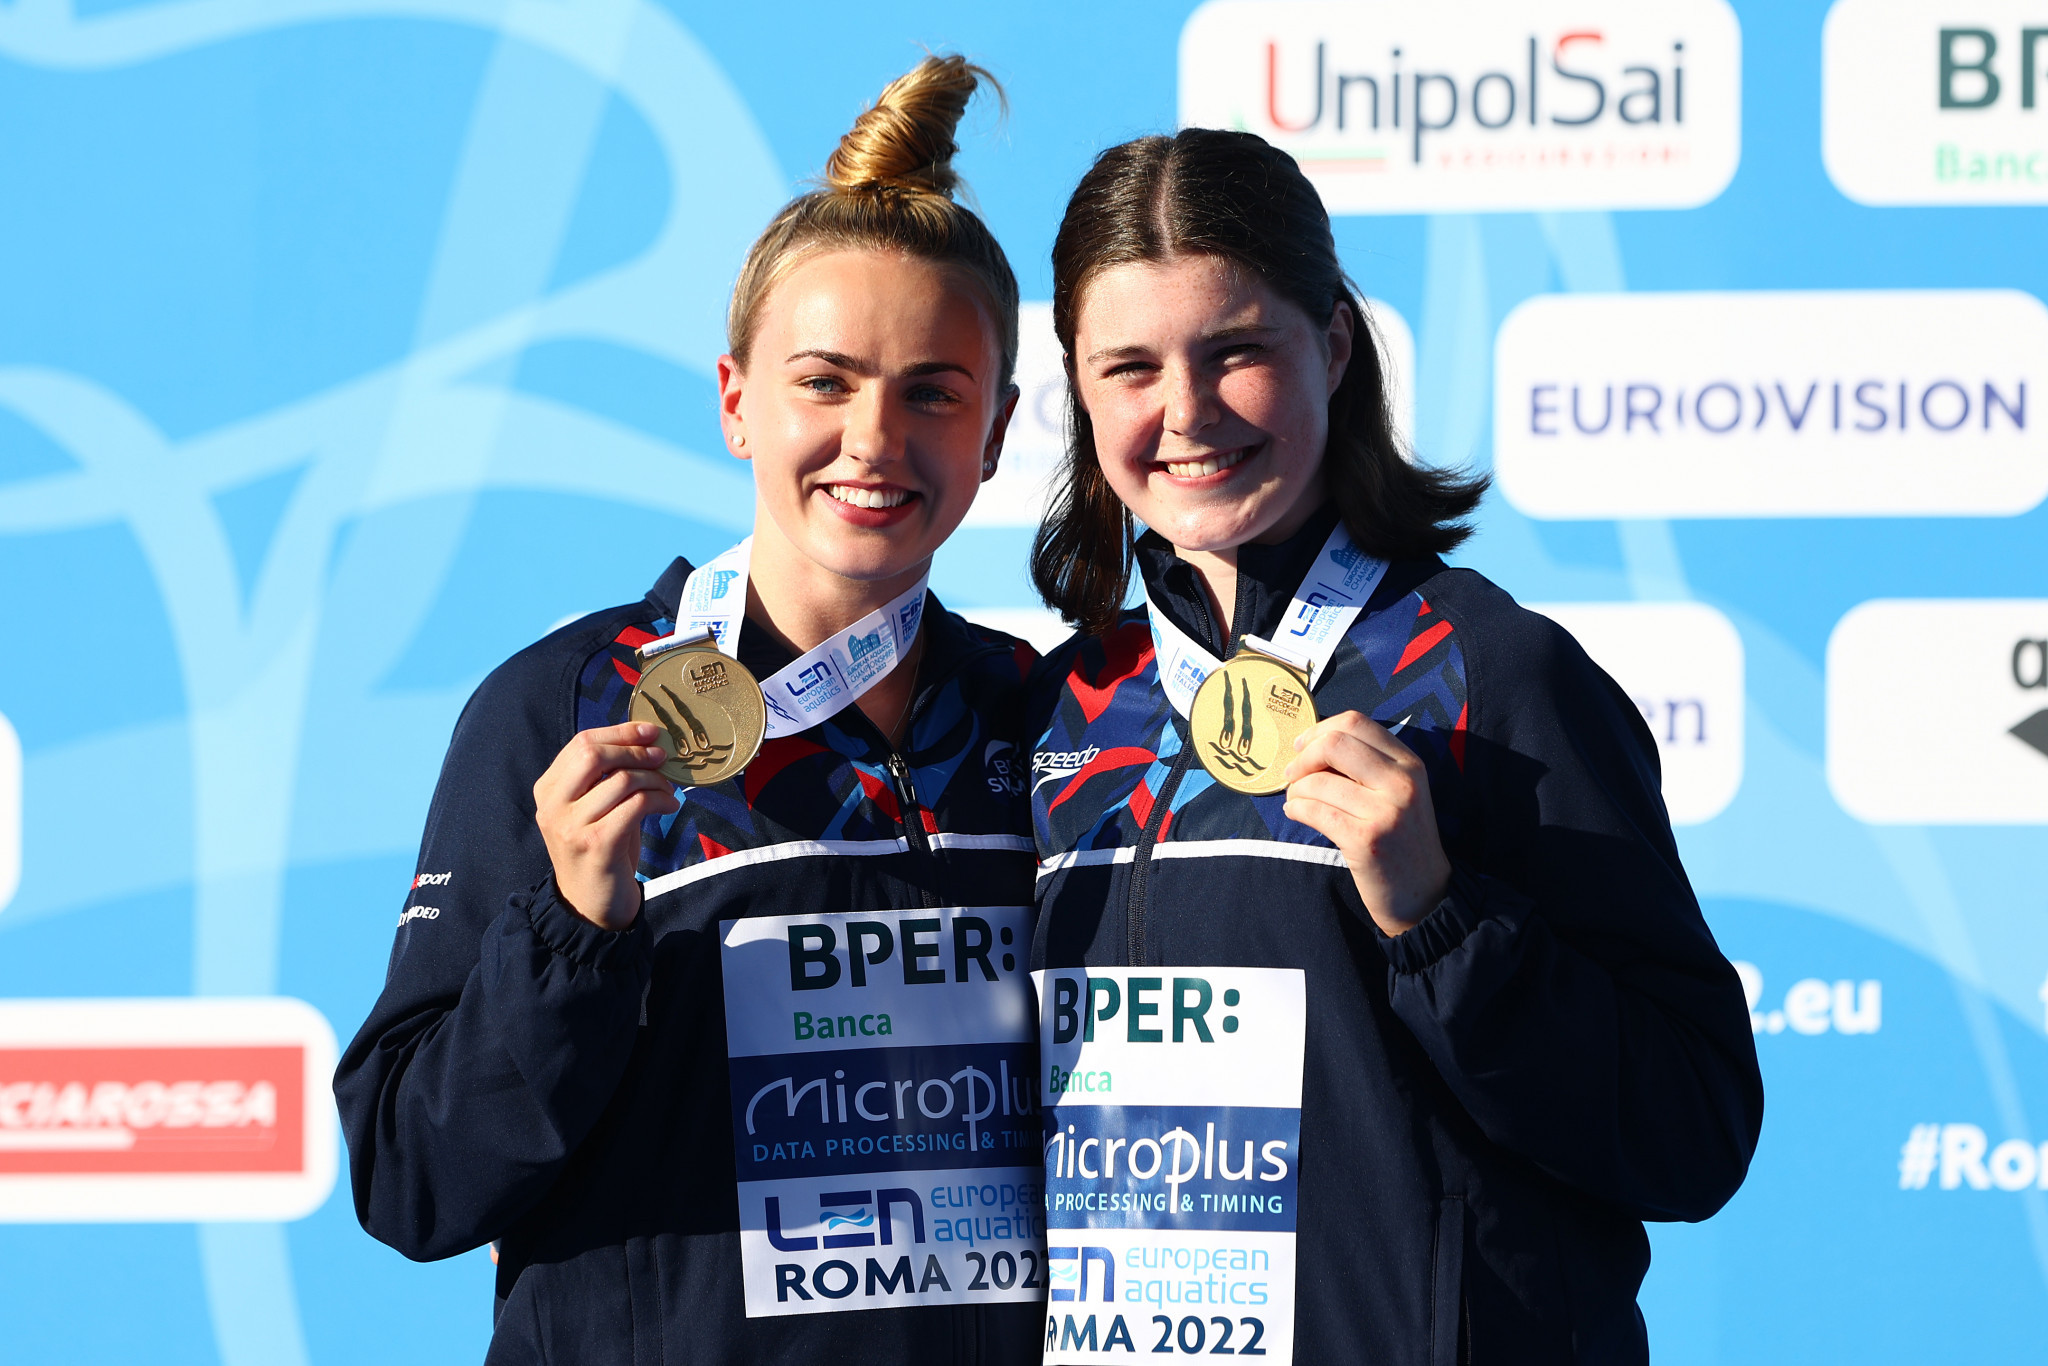 British duo Andrea Spendolini-Sirieix and Lois Toulson with the gold medals they won in the women's synchronised platform category today ©Getty Images